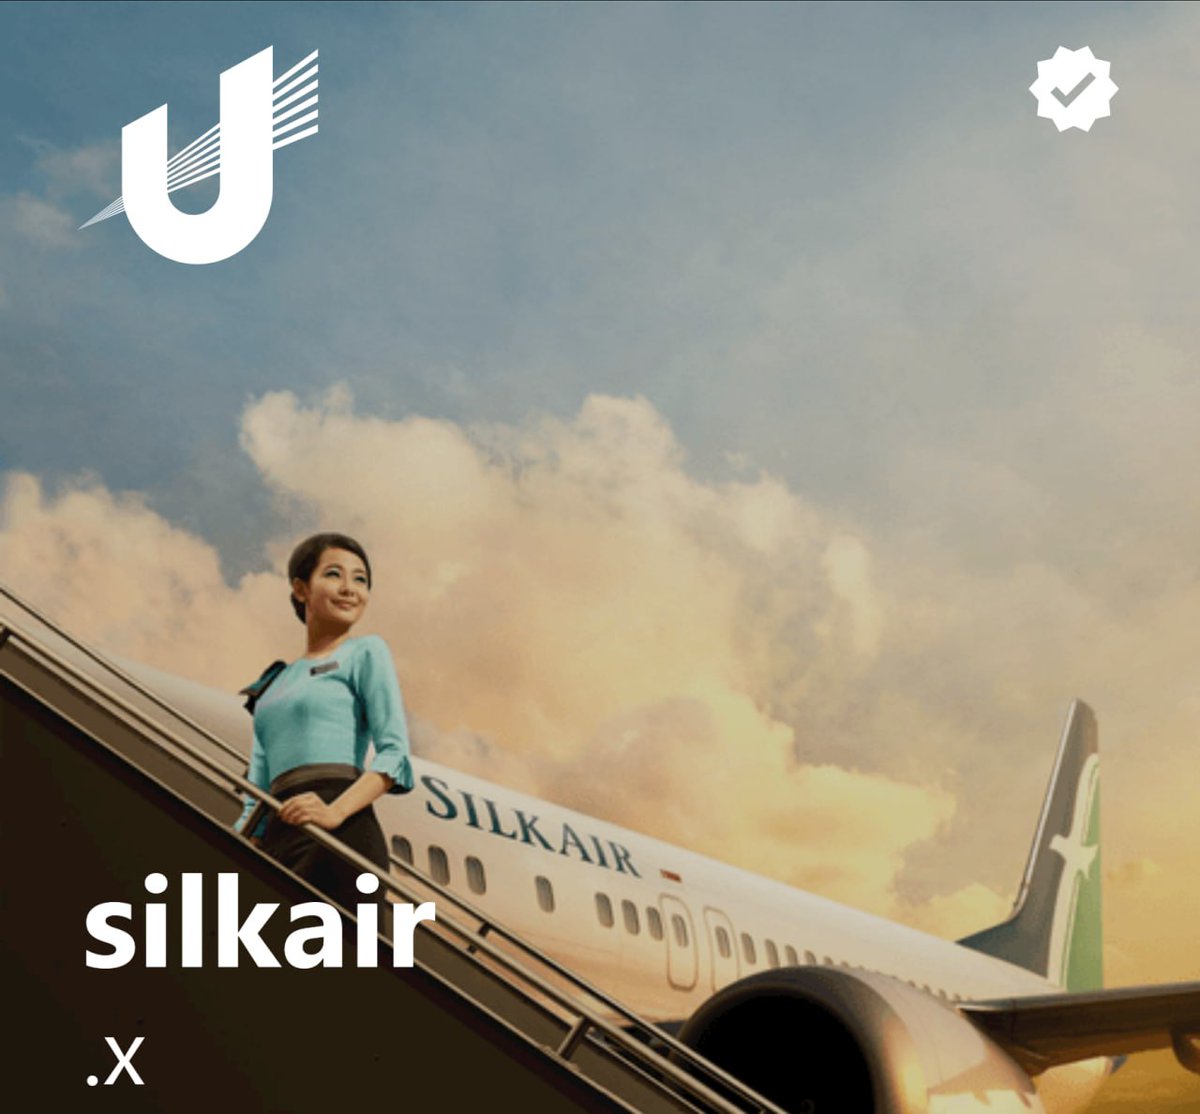 #Cool #NFT #Web3 #Domains by #UnstoppableDomains that you should owned right now !
#Unstoppable #digitalidentity #SingaporeAir #Temasek #Opensea #Singapore #airlines @SingaporeAir @TwitterSG #CryptoNews 

👉#SilkAir❤️✈️
👇
opensea.io/wwweb/collecte…